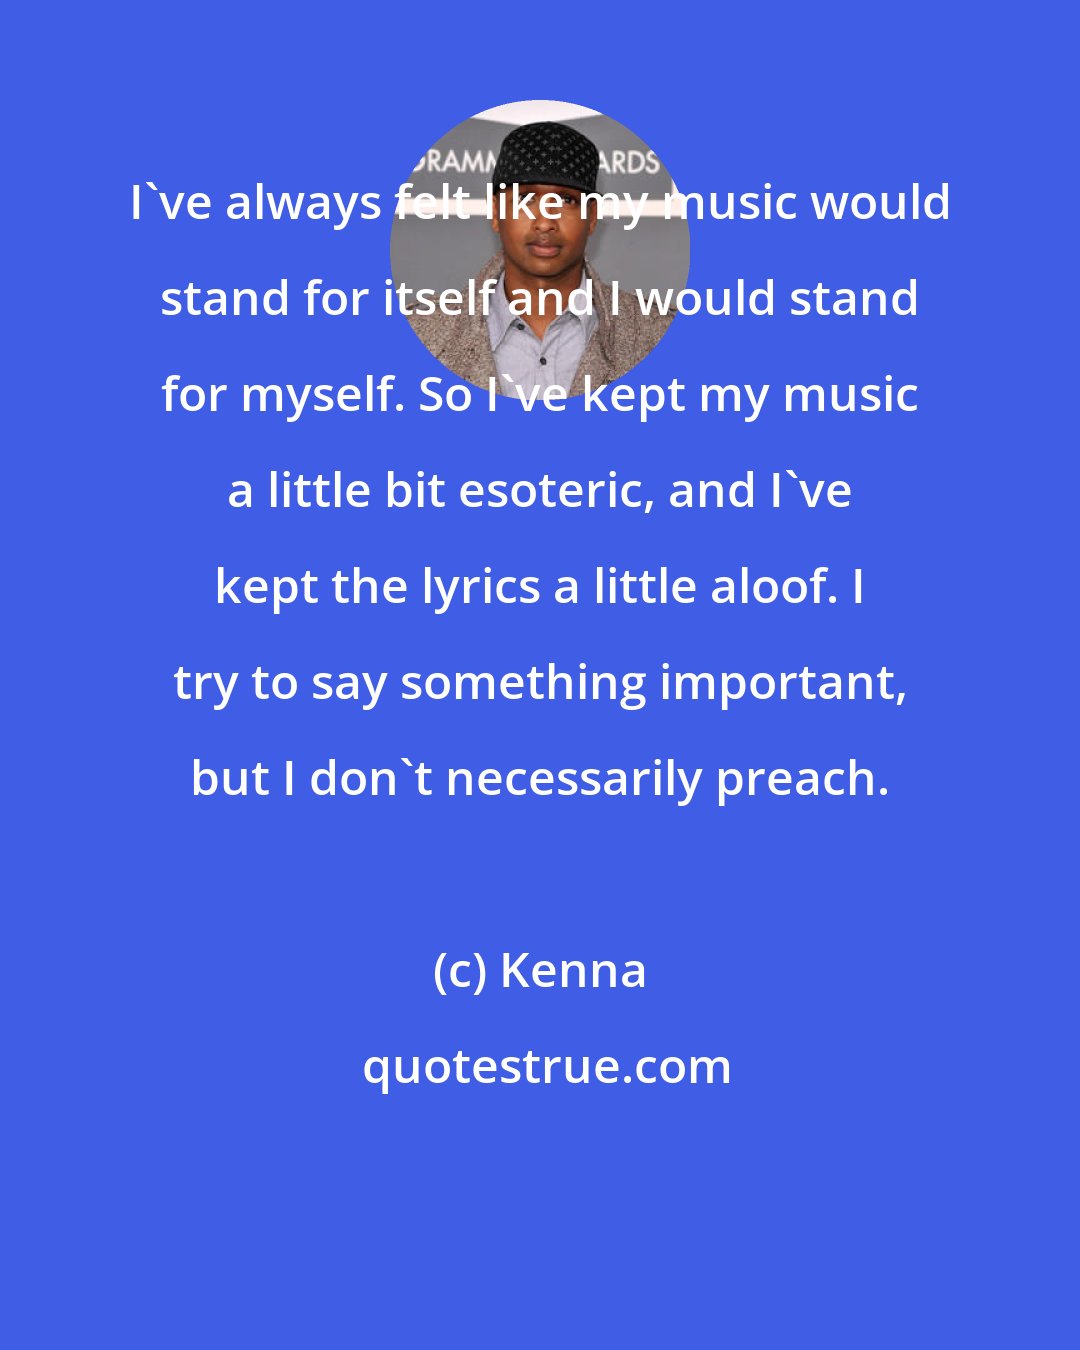 Kenna: I've always felt like my music would stand for itself and I would stand for myself. So I've kept my music a little bit esoteric, and I've kept the lyrics a little aloof. I try to say something important, but I don't necessarily preach.